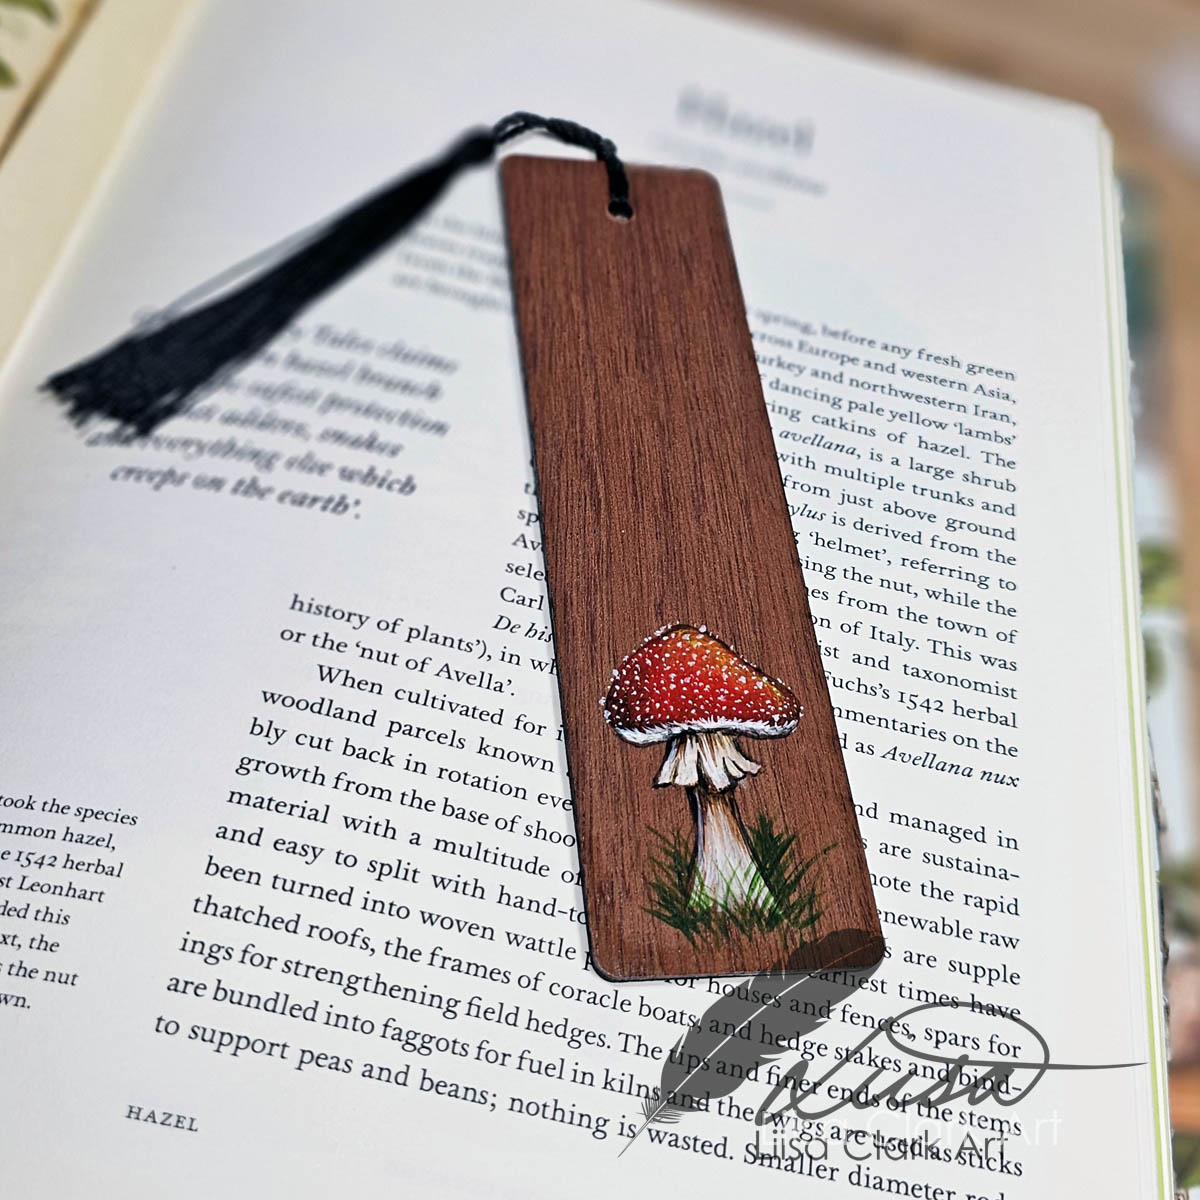 Hand Painted Bookmarks